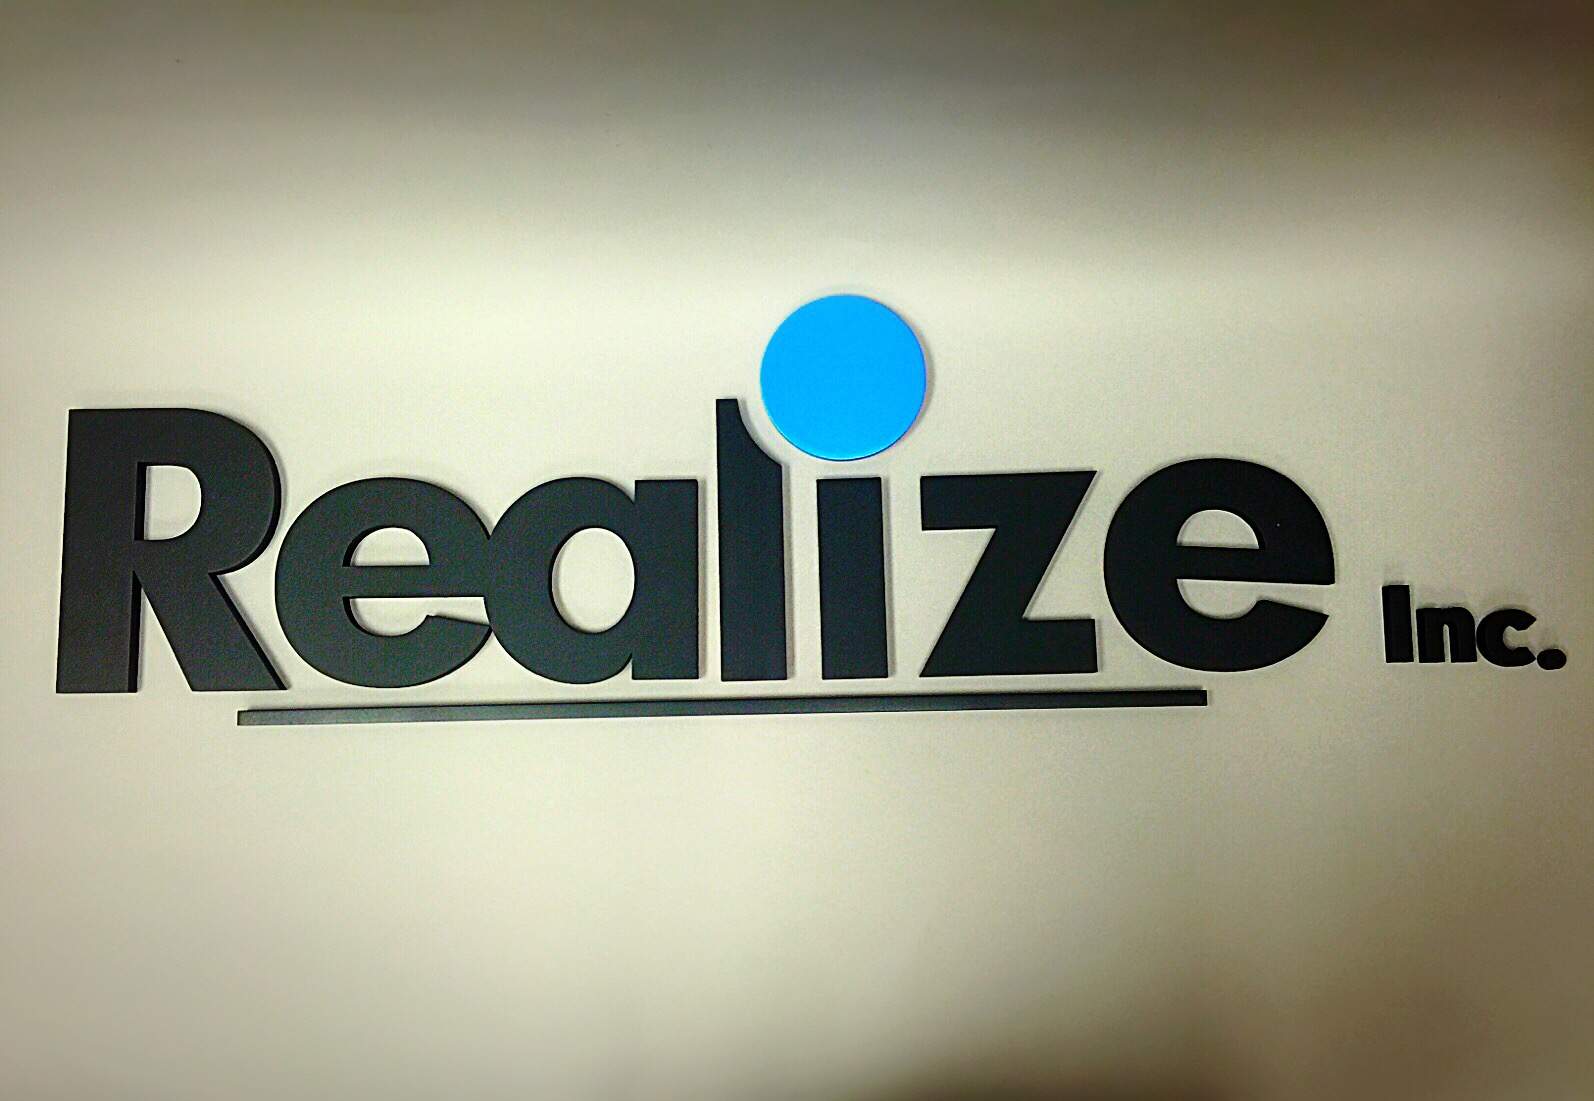 Realize is hiring!